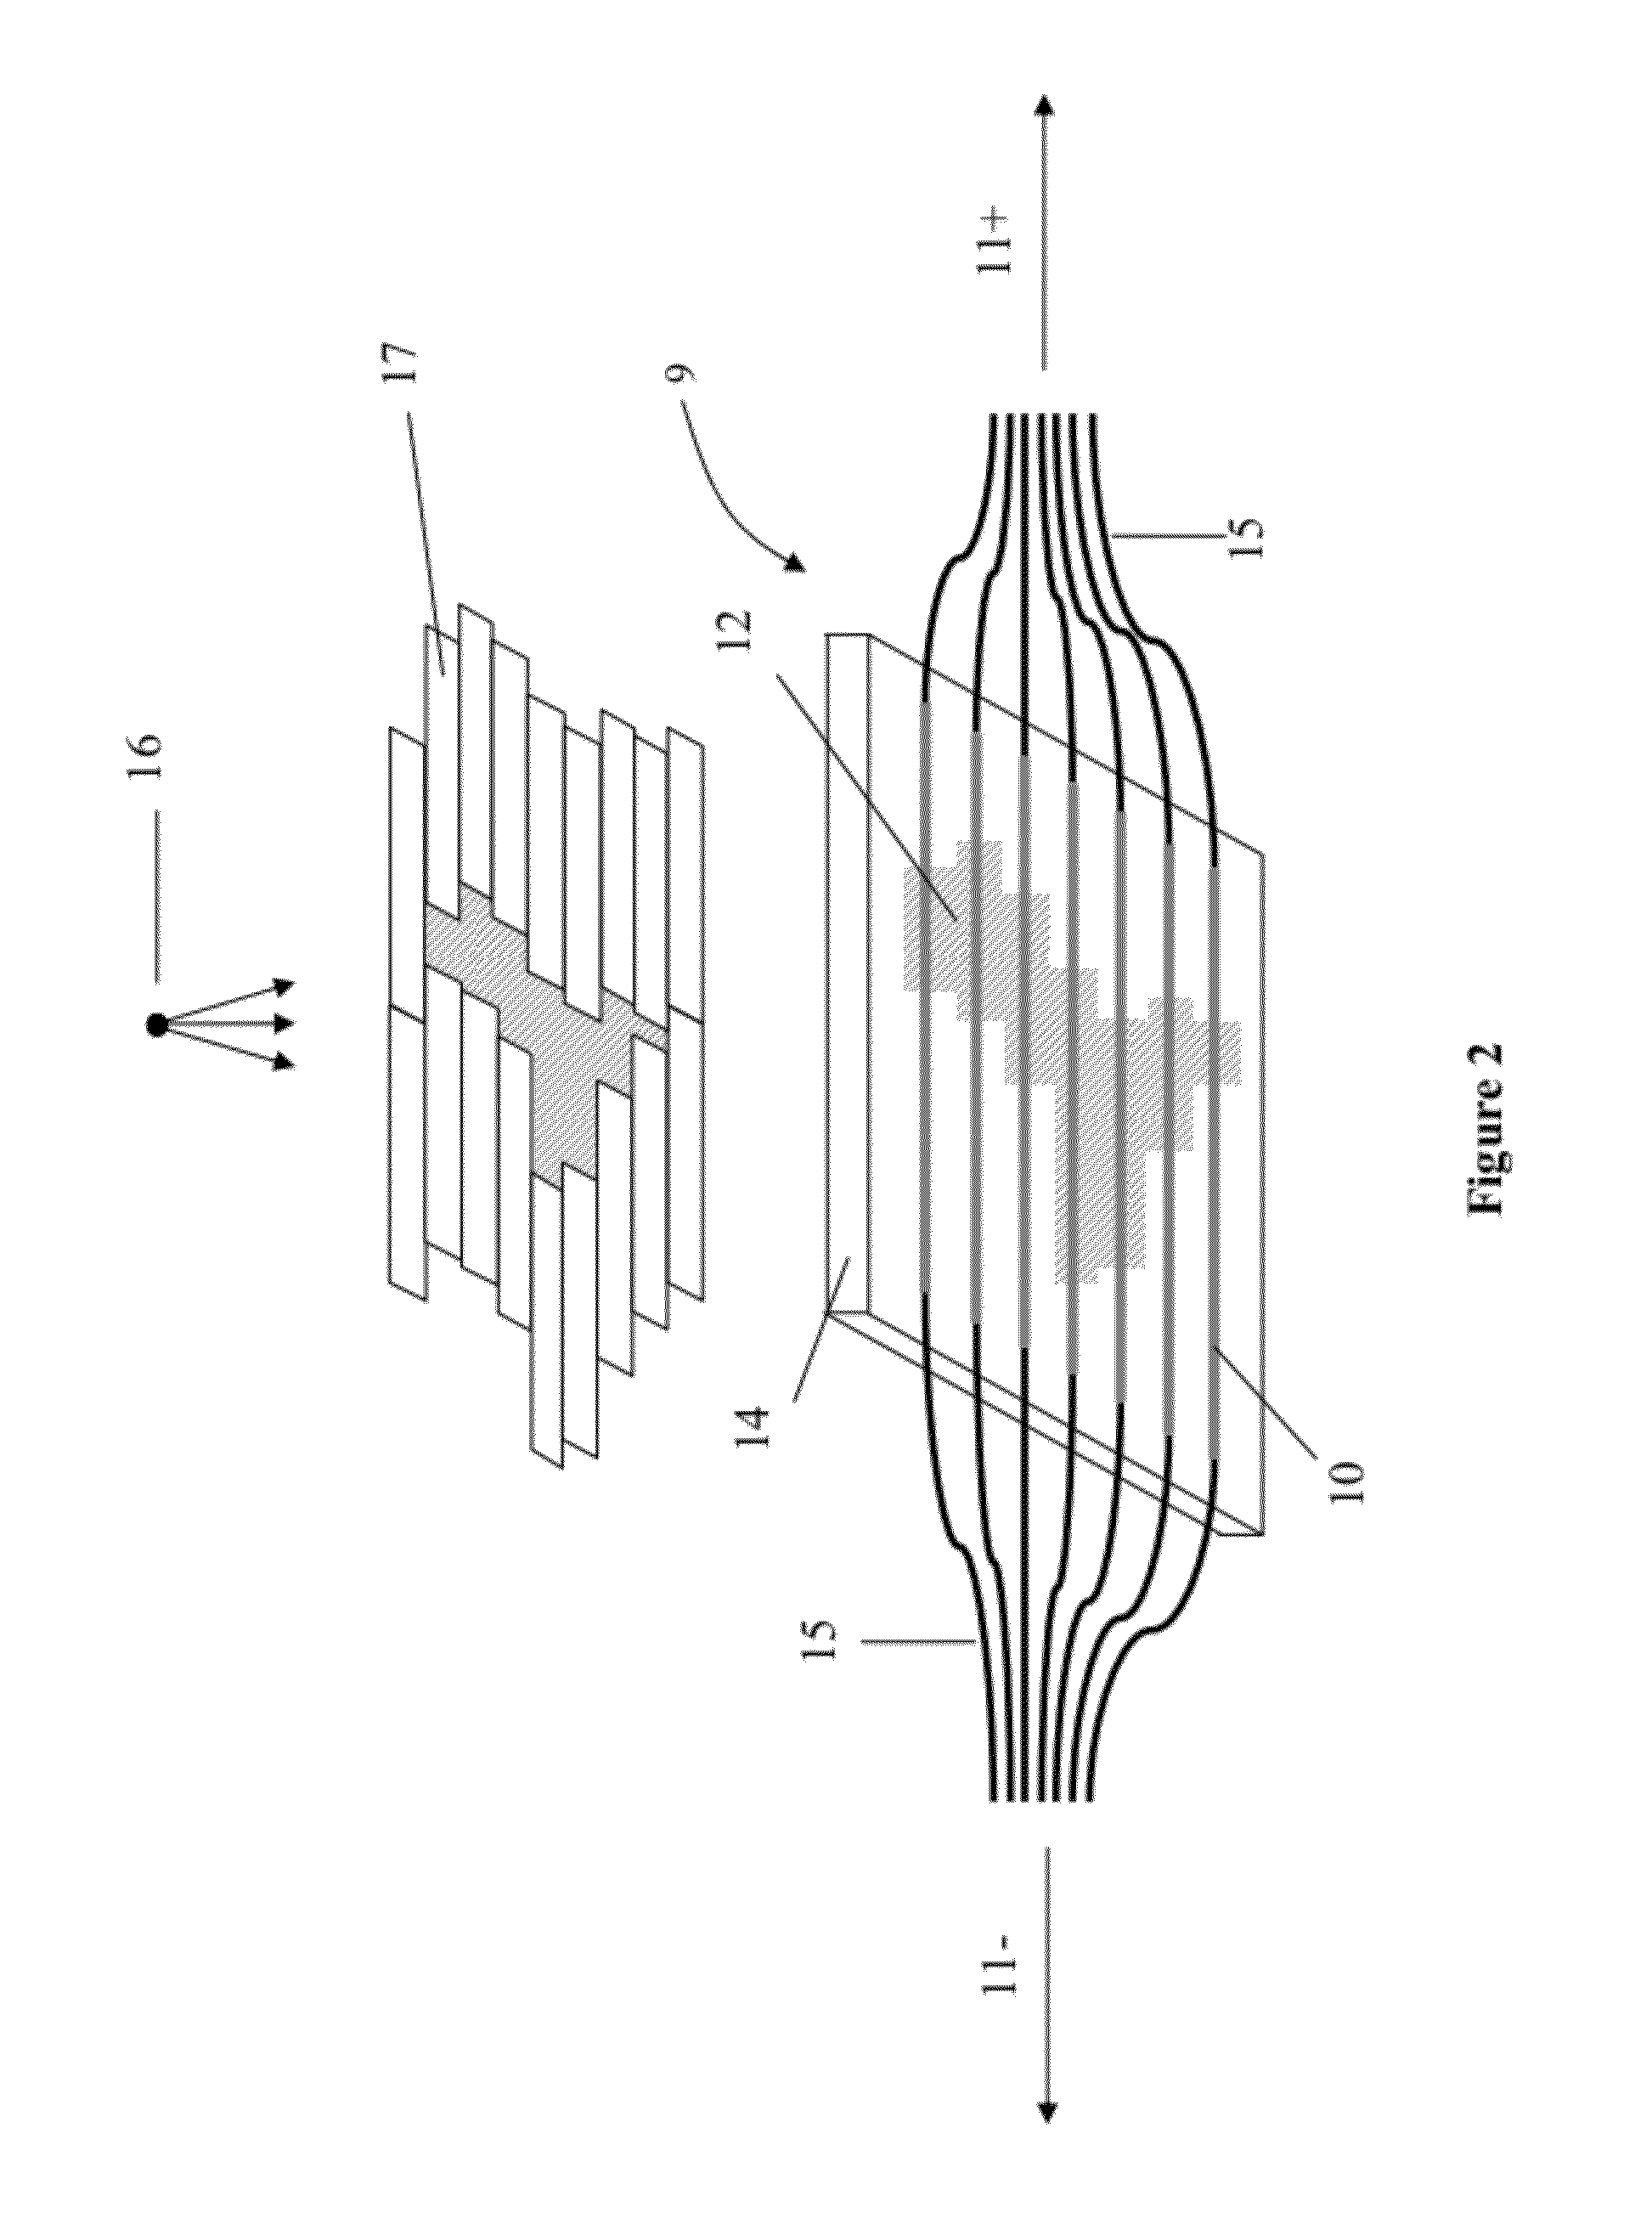 Fluence monitoring devices with scintillating fibers for x-ray radiotherapy treatment and methods for calibration and validation of same